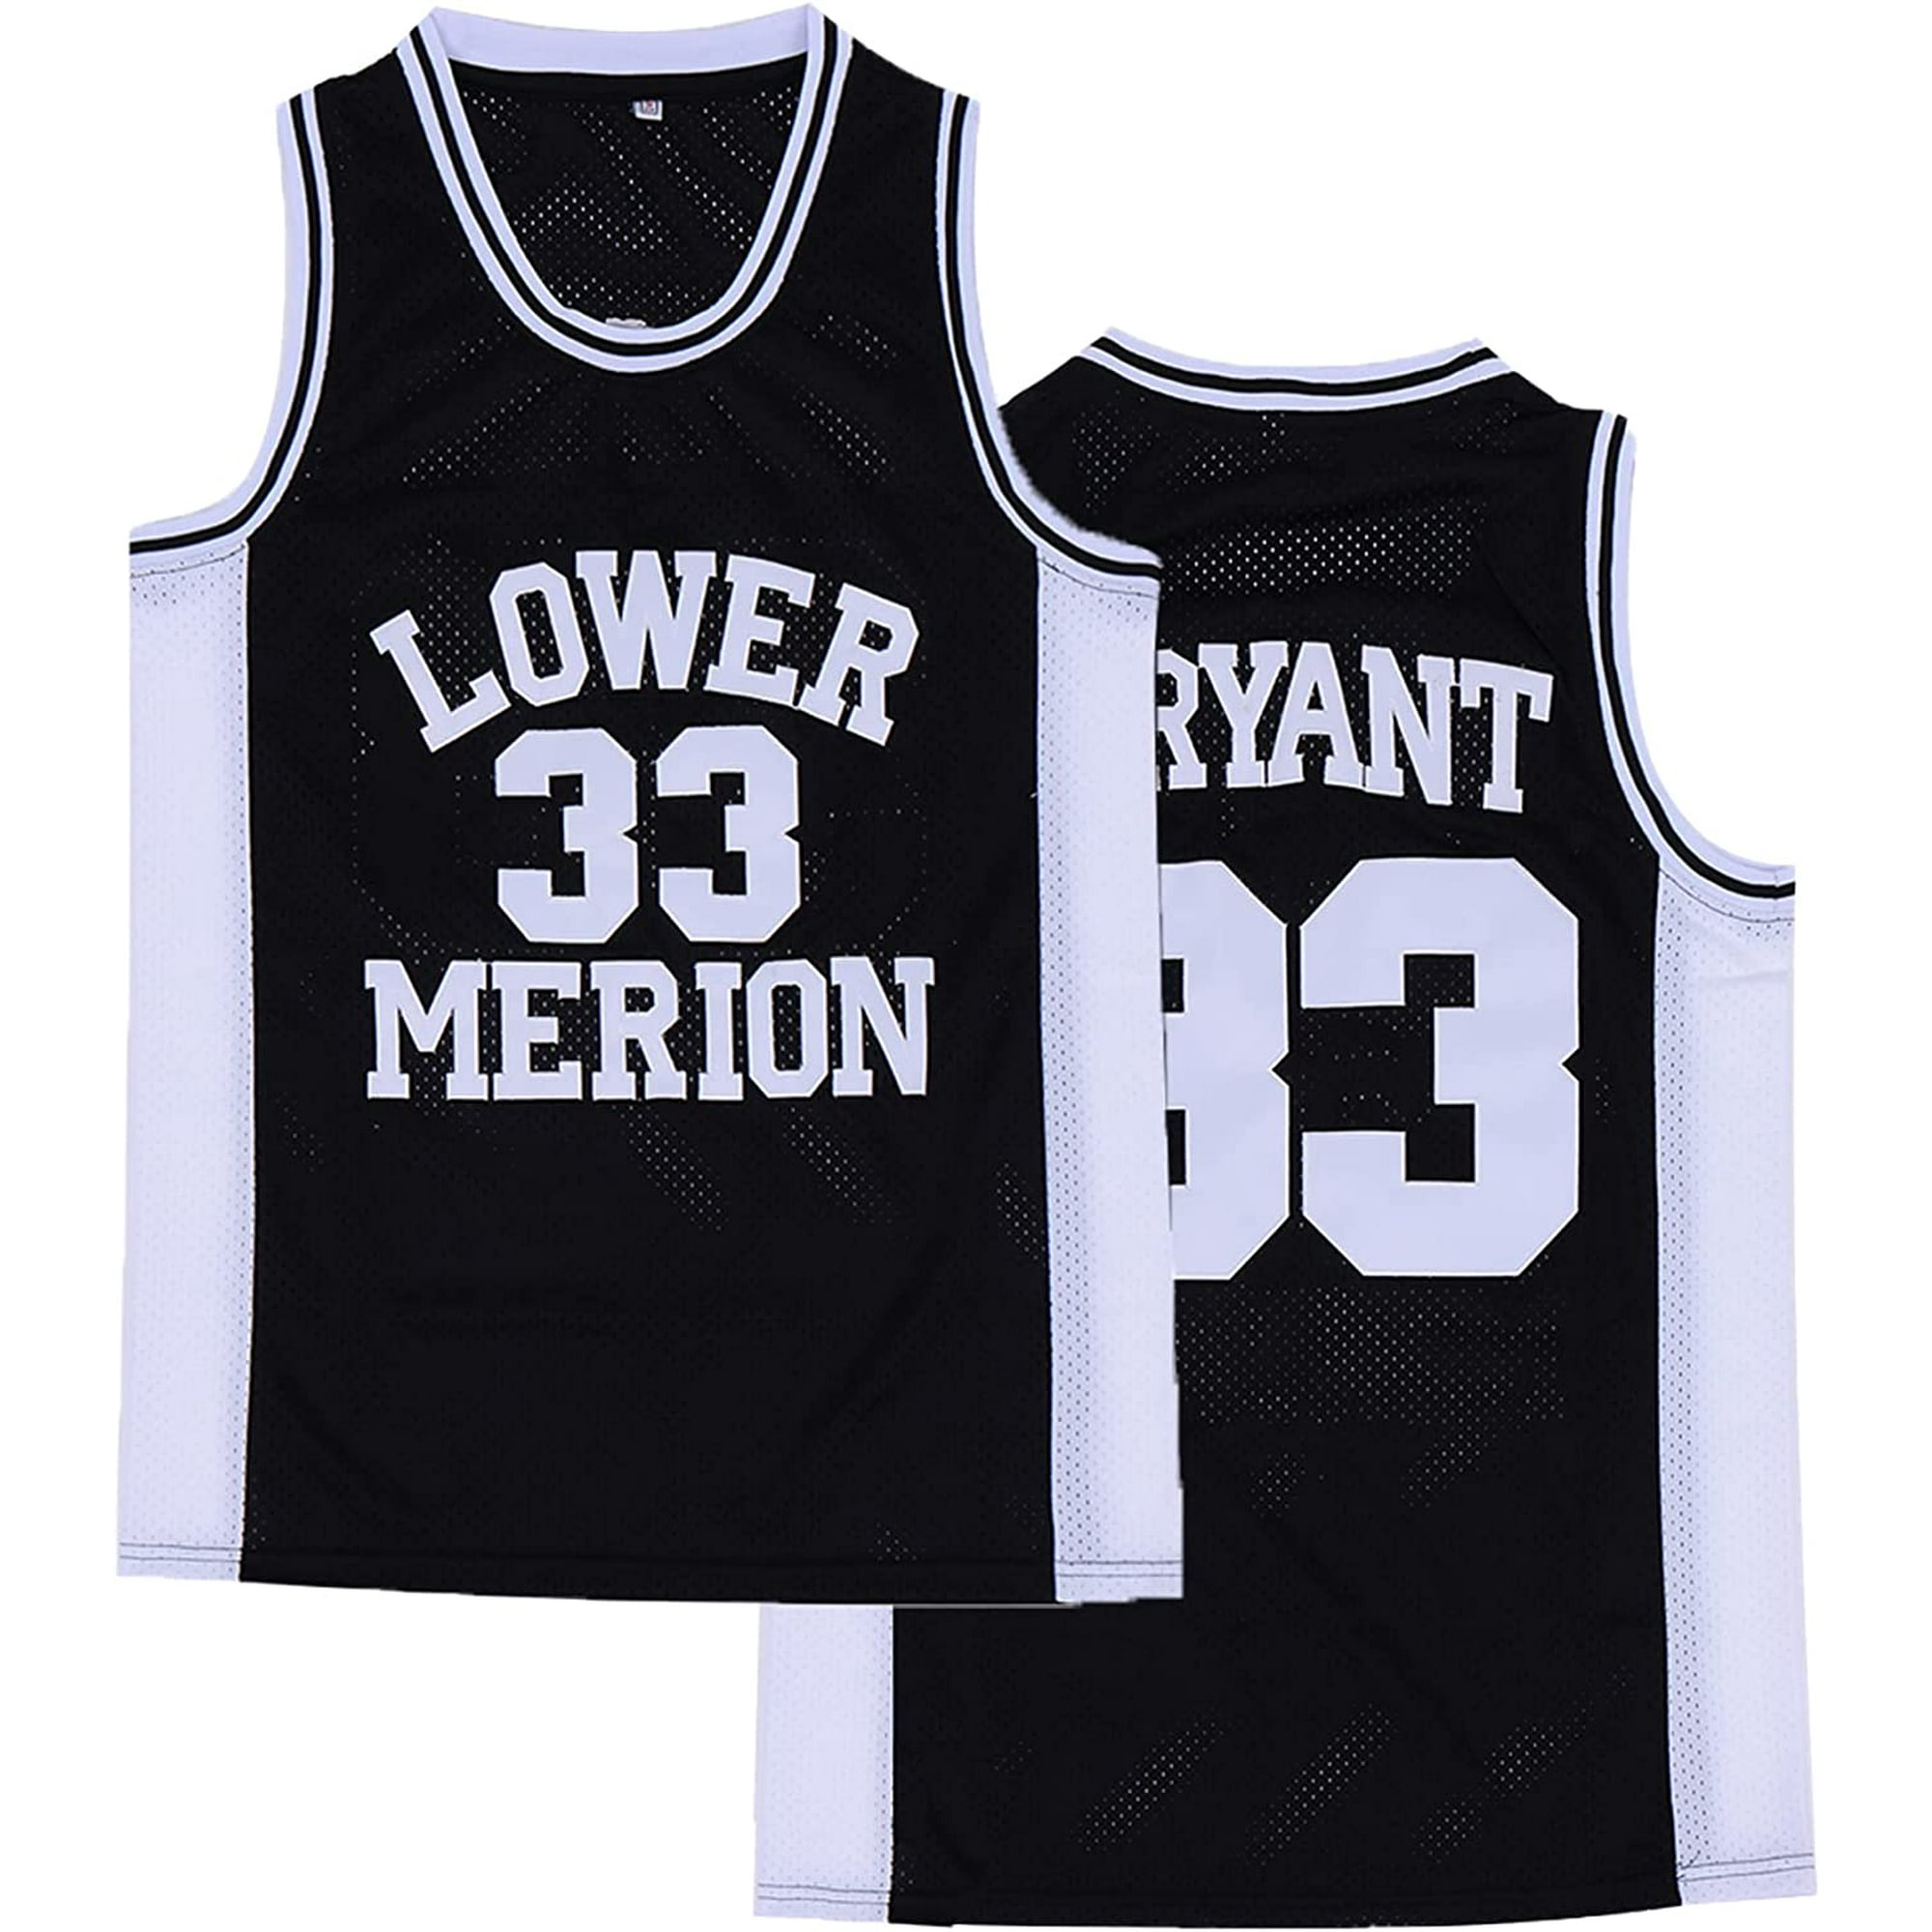 Your Team Lower Merion #33 Stitched Men's High School Basketball Jersey Black 3XL, Blue